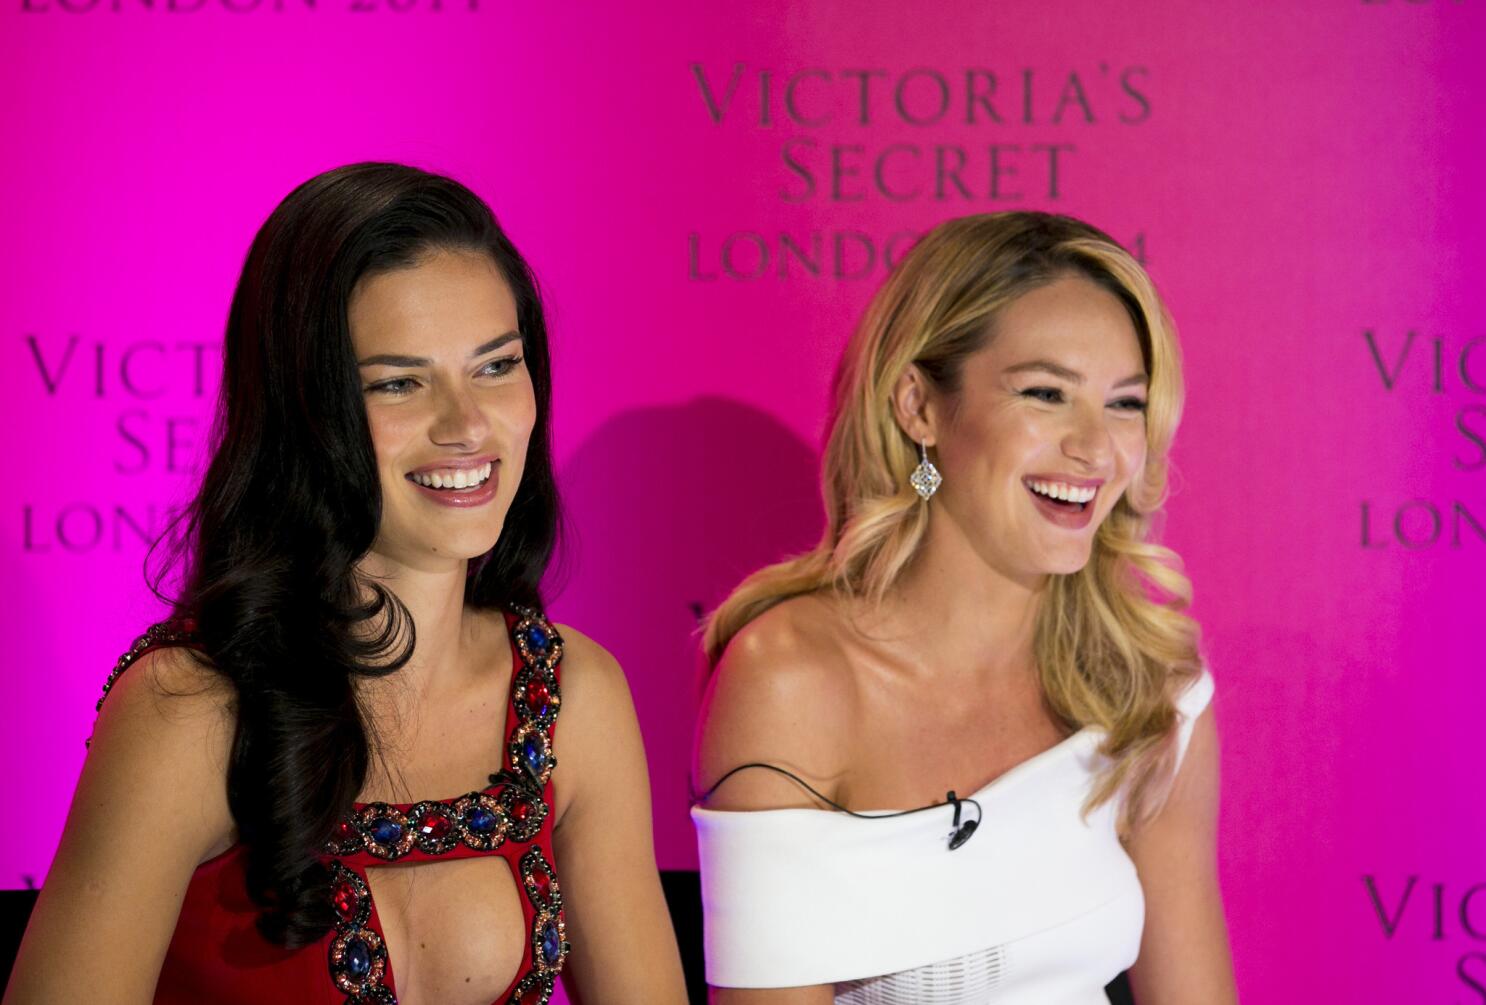 Victoria's Secret on X: Coming in hot pink: the new Body by